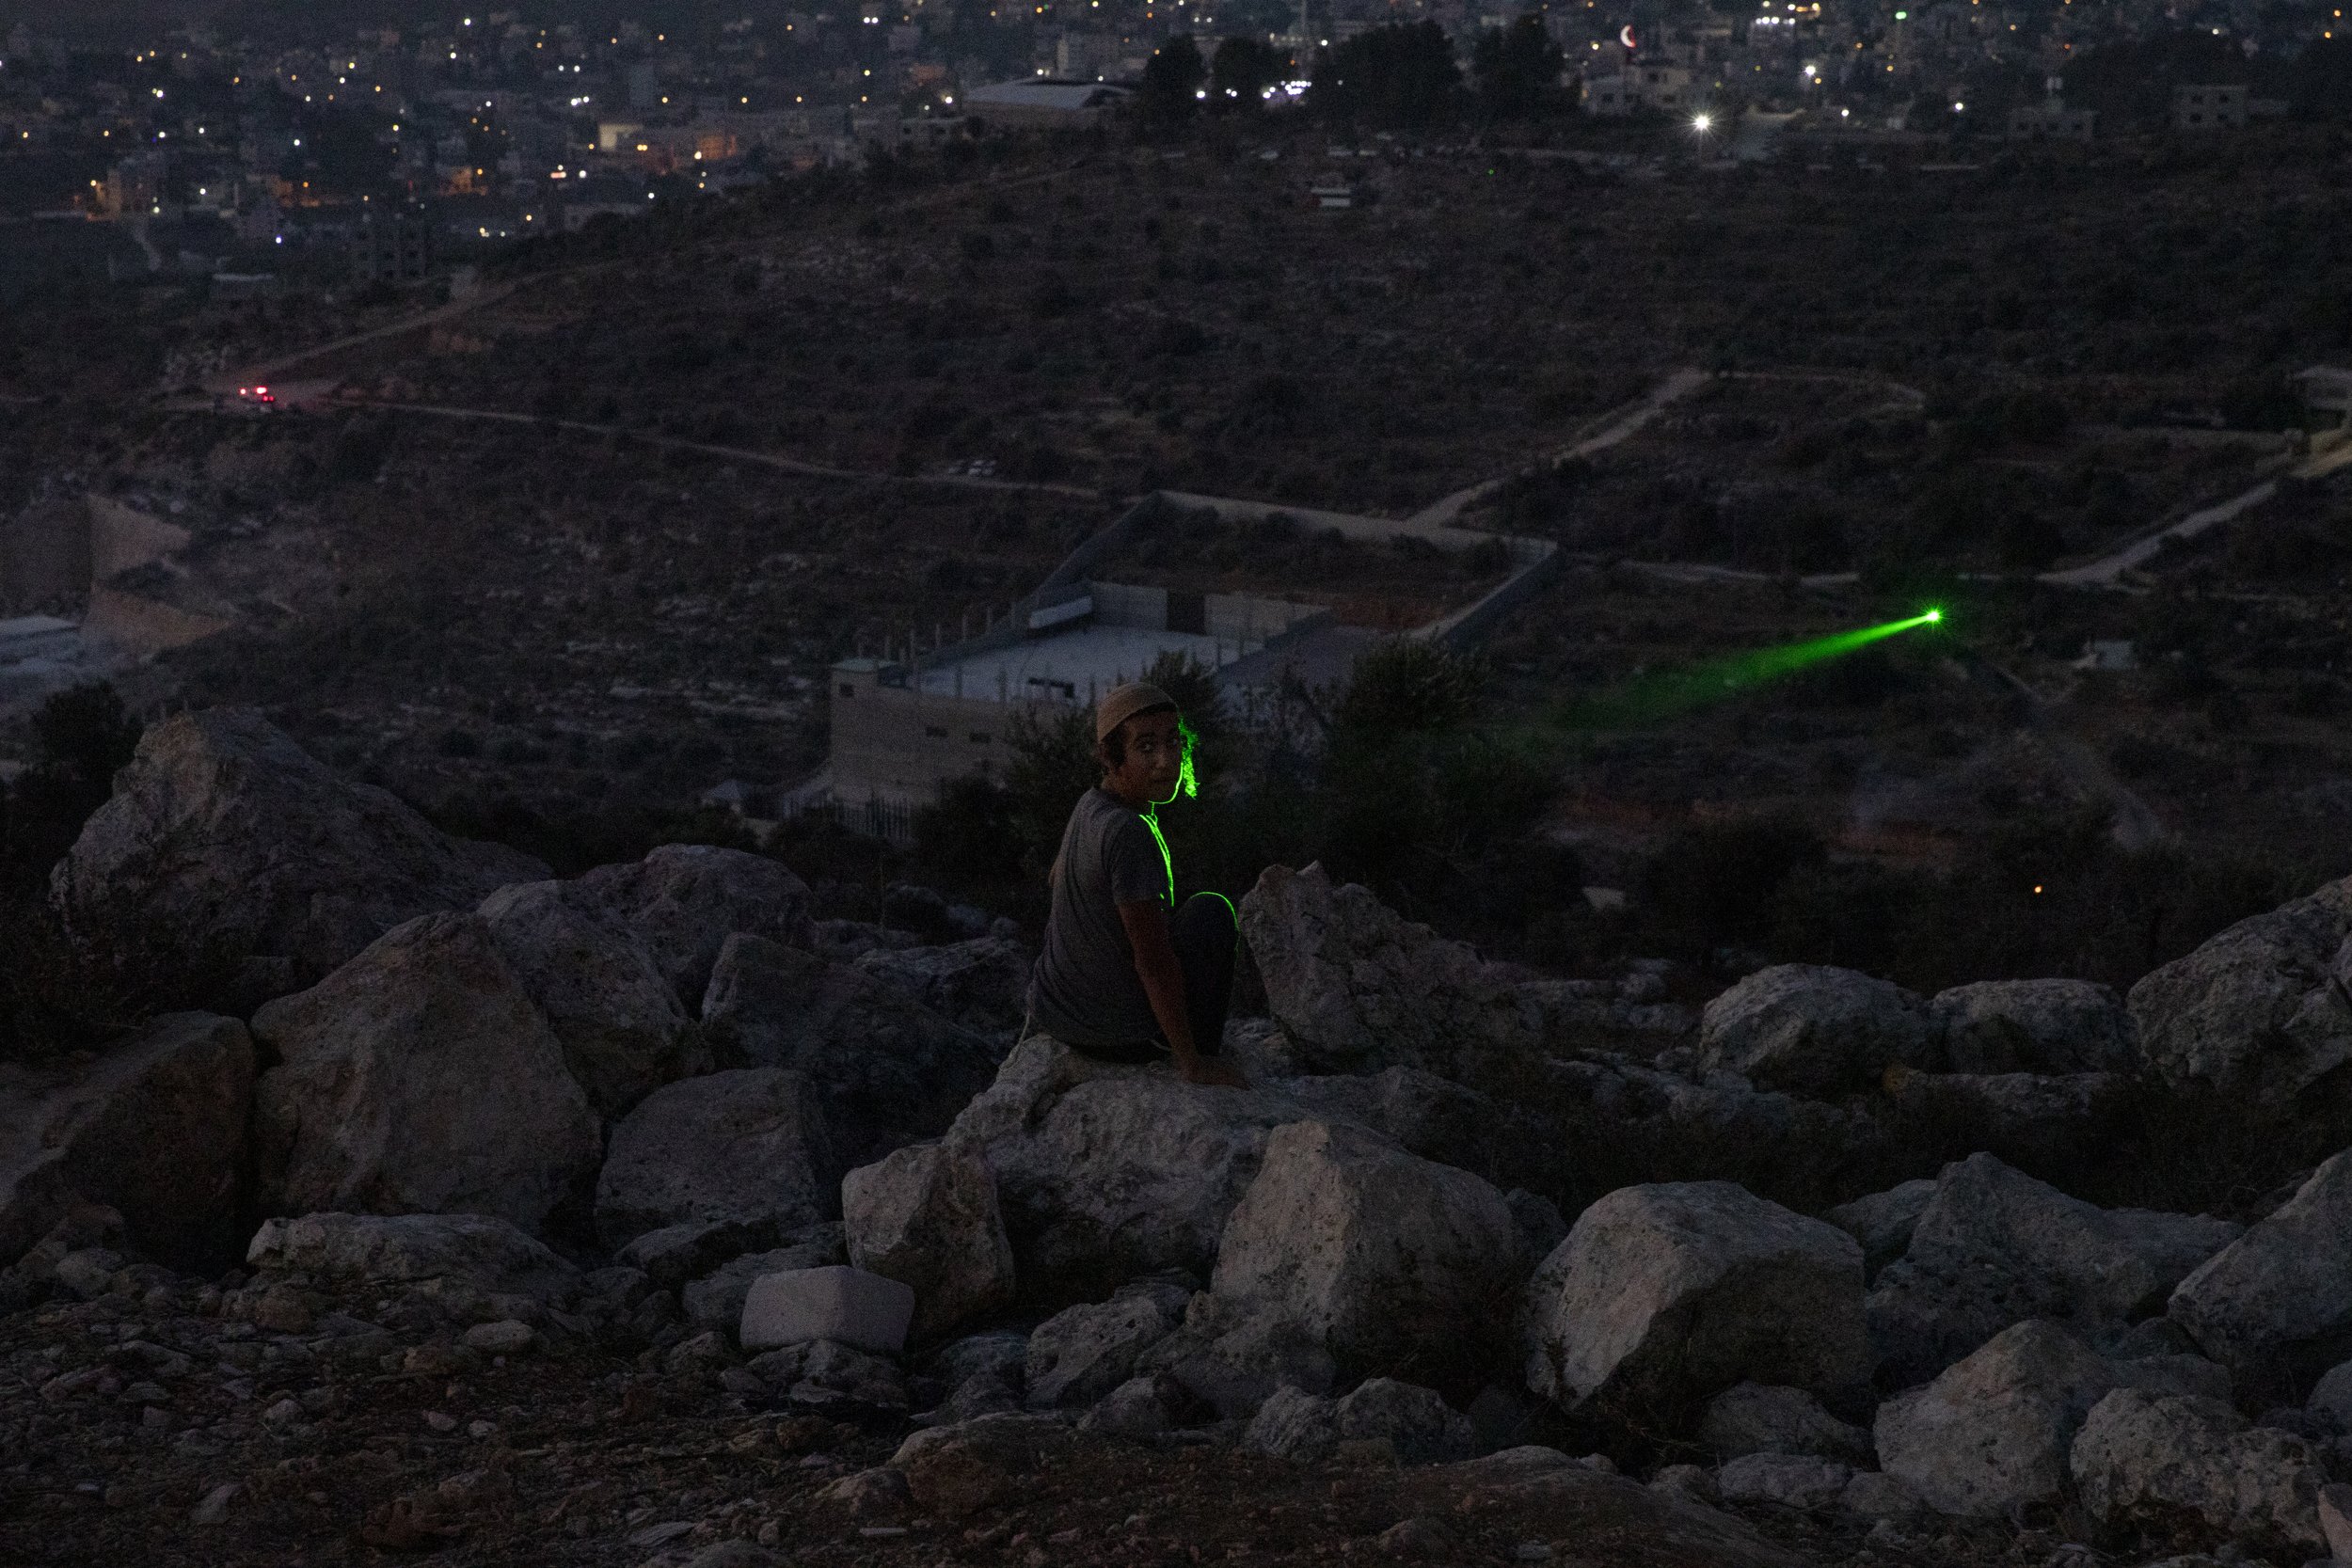  An Israeli settler is illuminated by a Palestinian protester’s laser at the recently established wildcat outpost of Eviatar near the West Bank city of Nablus, on July 1, 2021. (AP Photo/Maya Alleruzzo) 